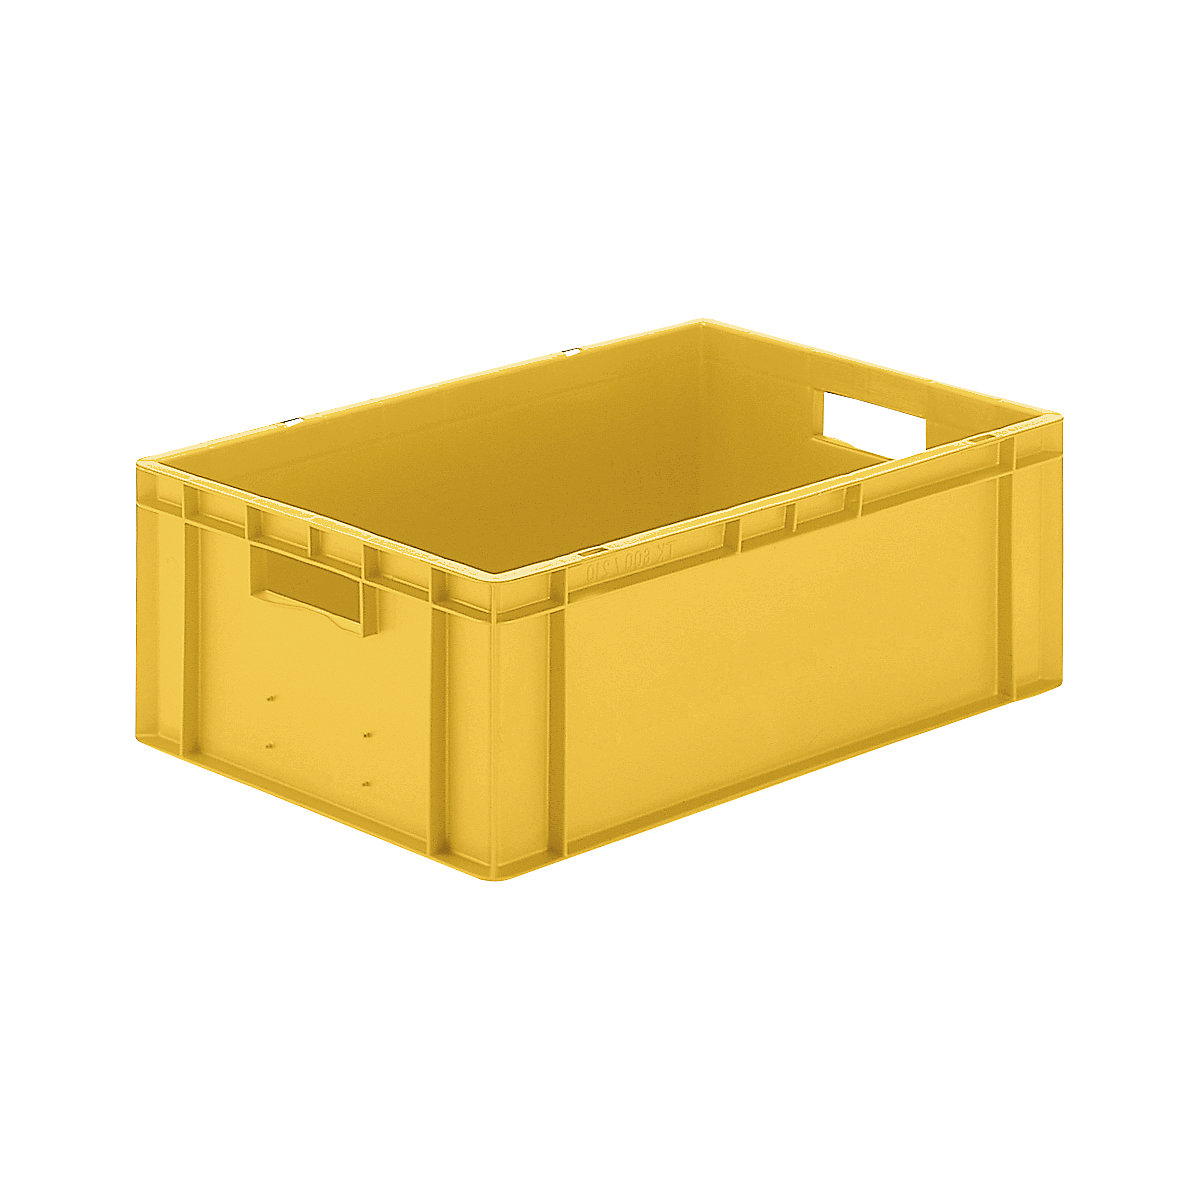 Euro stacking container, closed walls and base, LxWxH 600 x 400 x 210 mm, yellow, pack of 5-8